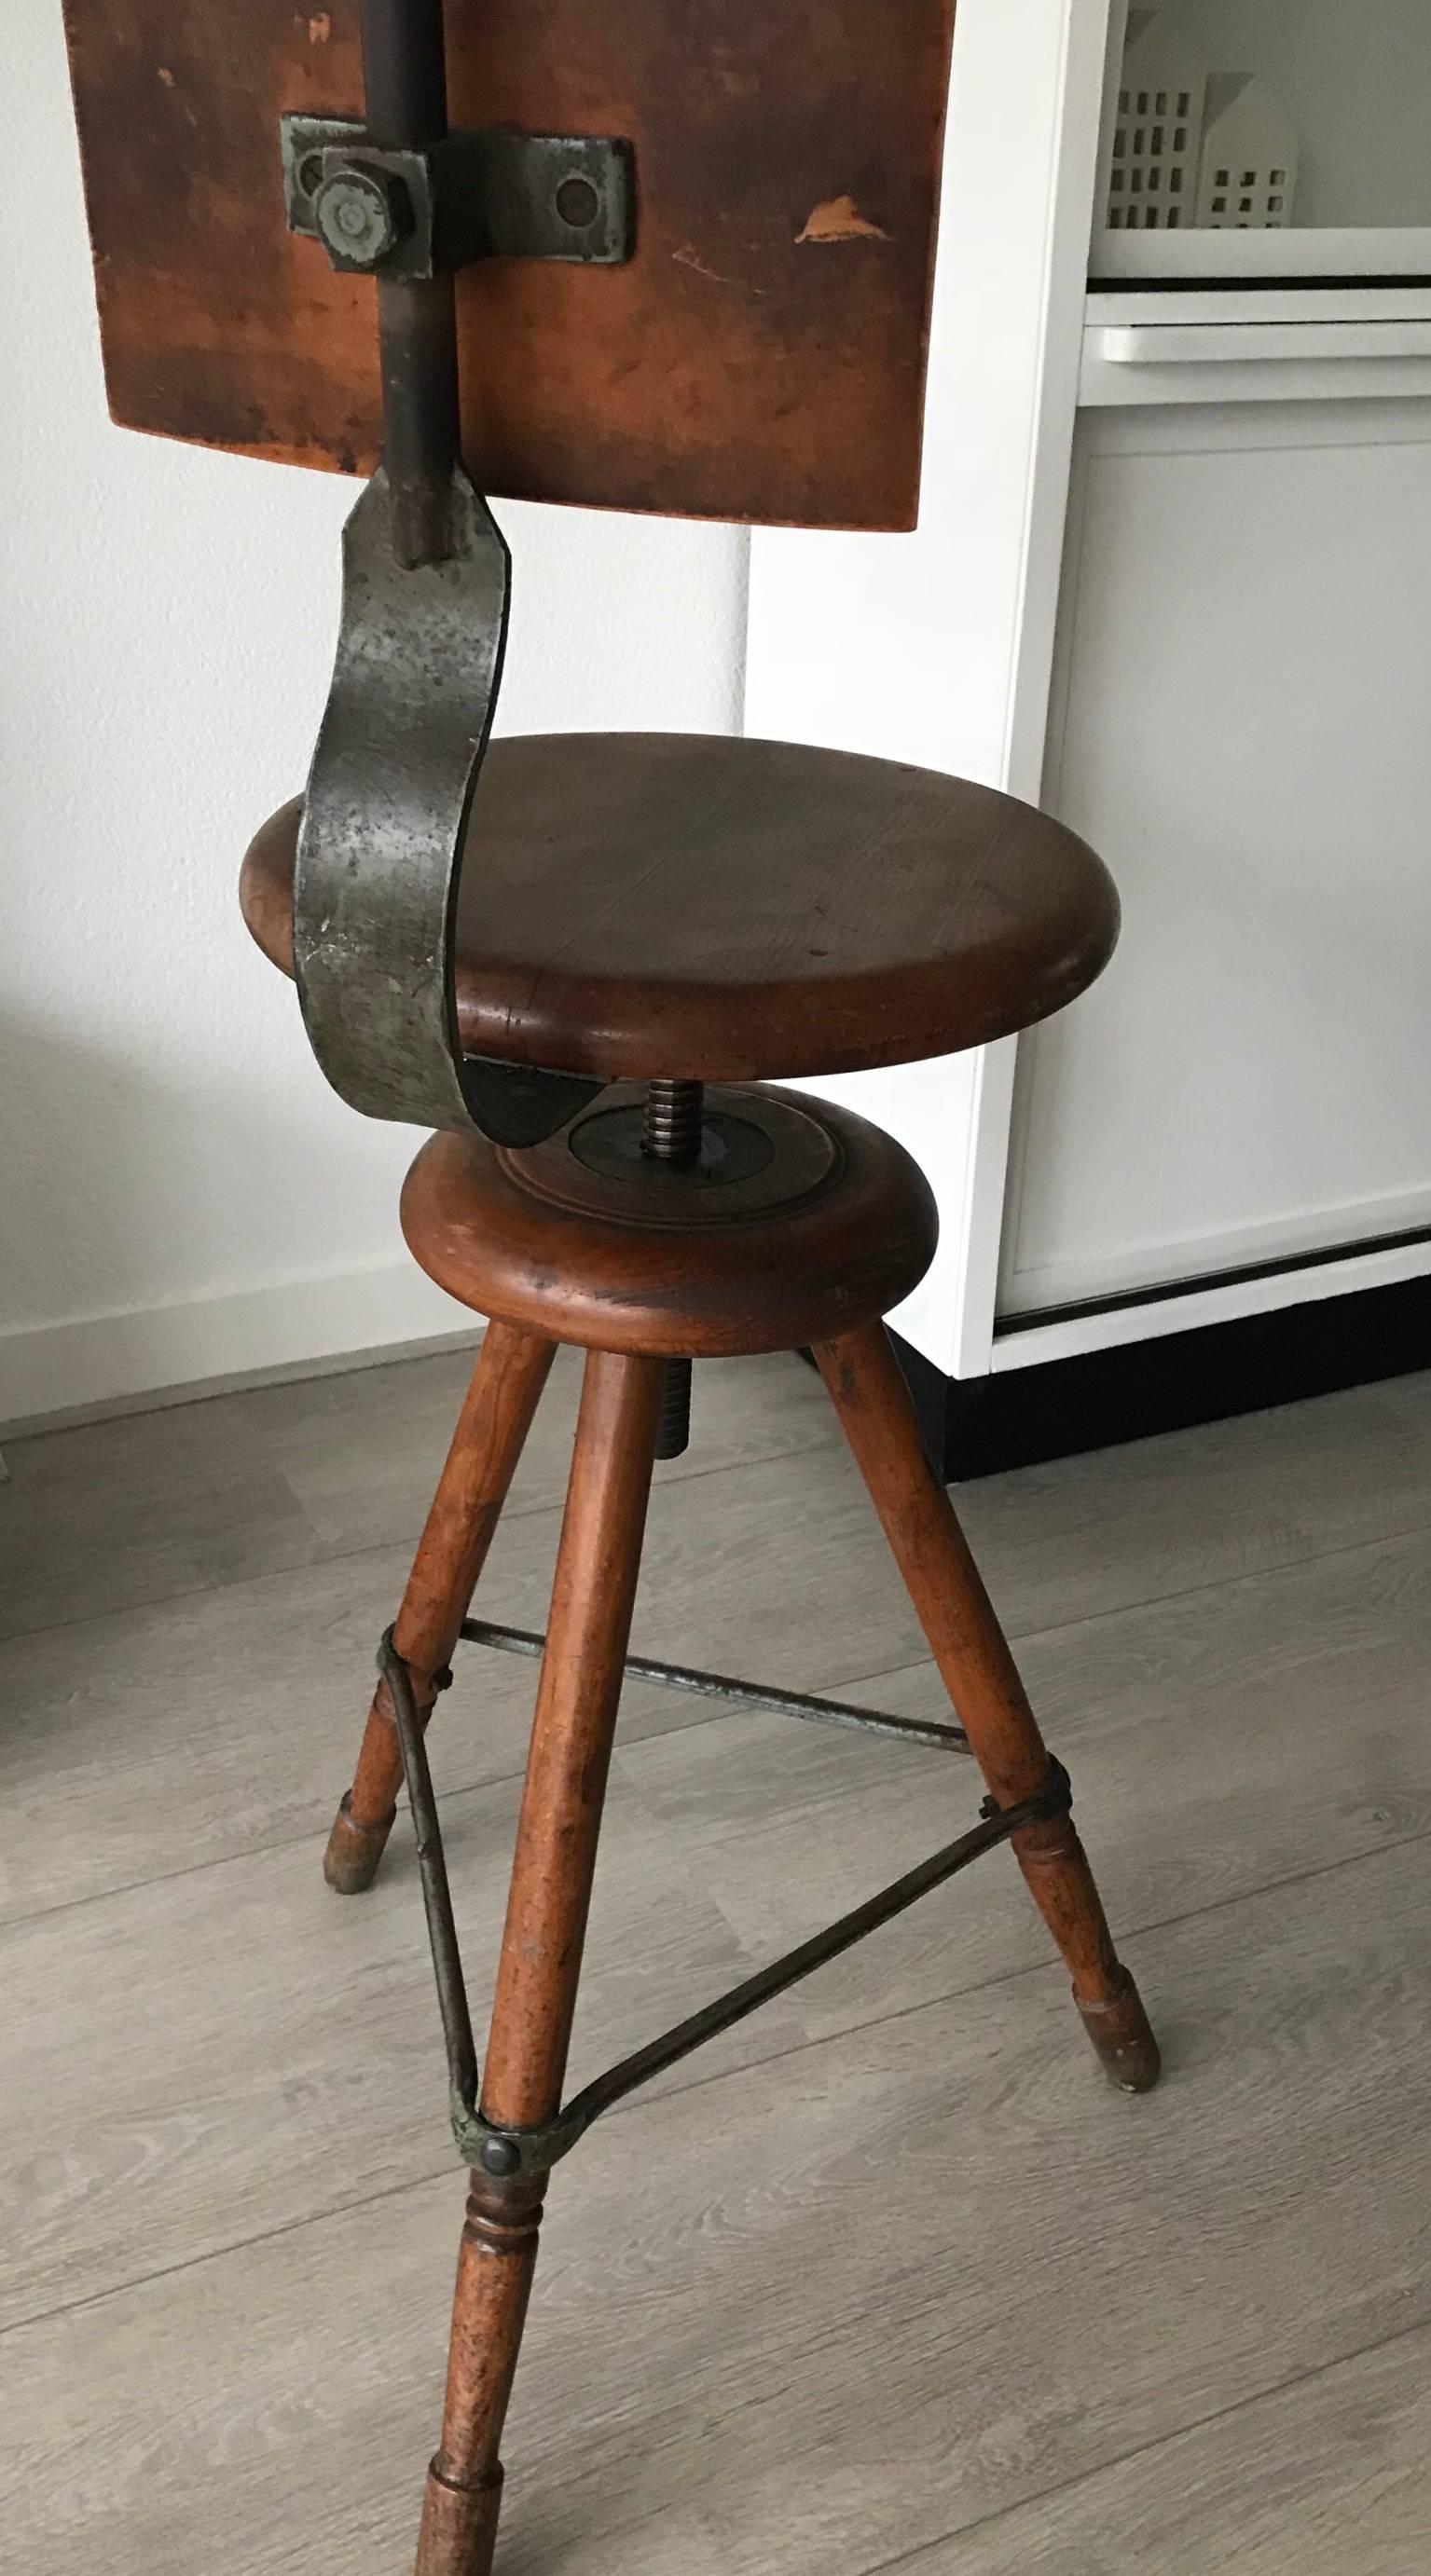 Arts and Crafts Rare Industrial Artist Studio Spindle Chair or Stool Adjustable in Height, 1920s